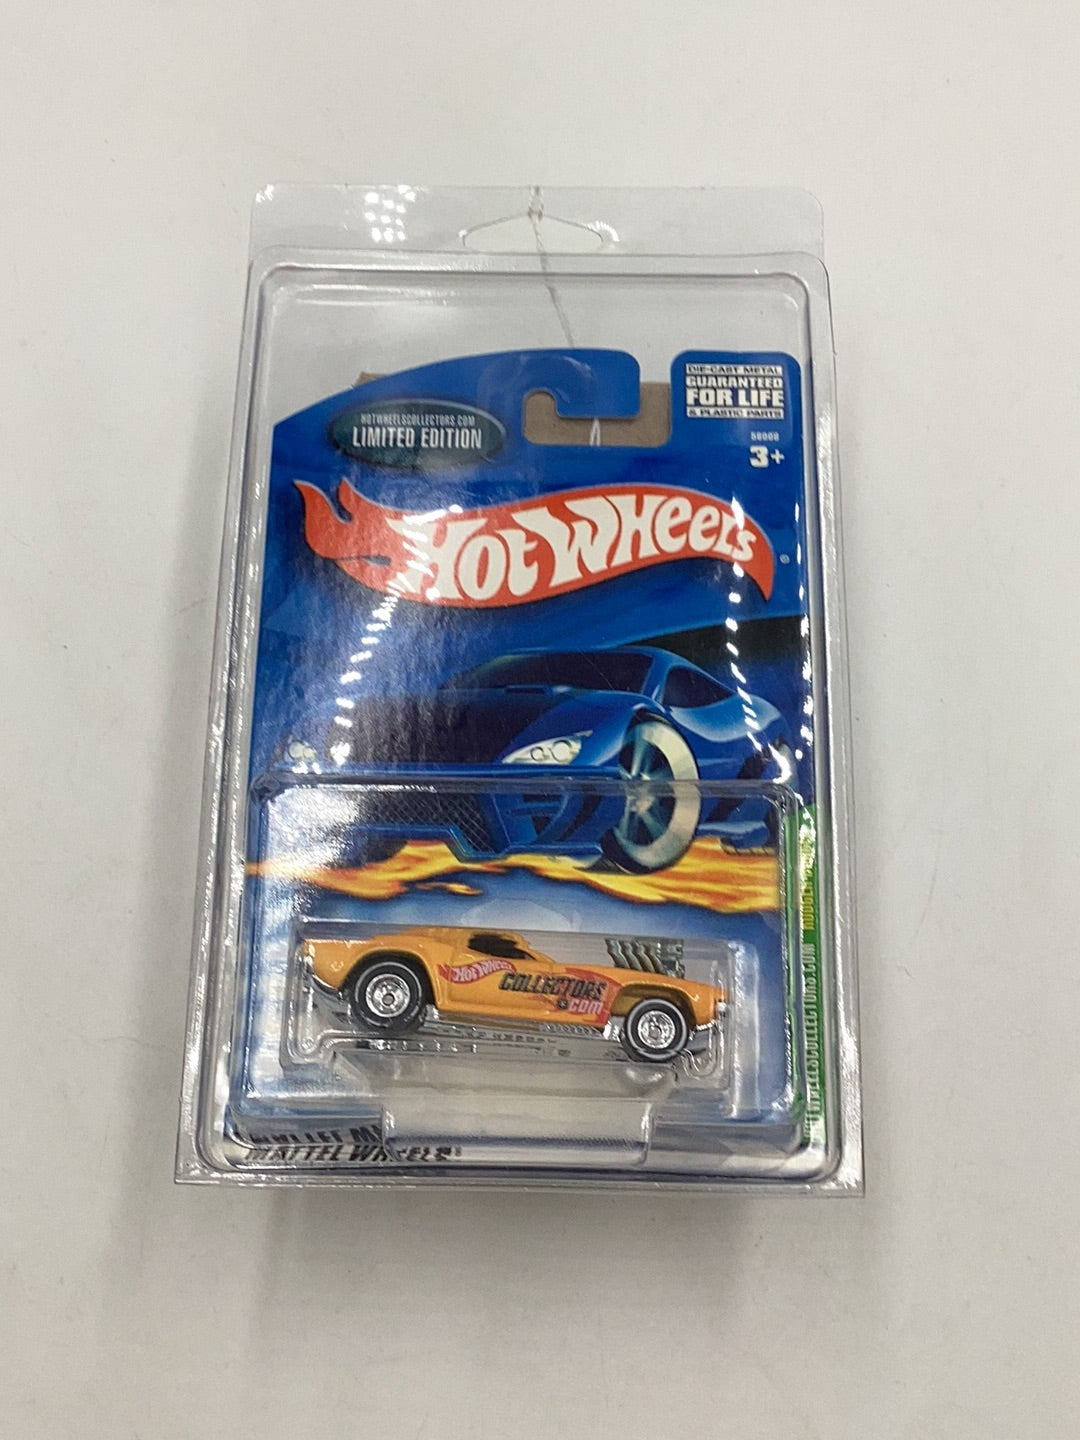 Hot wheels collectors.com Rodger Dodger with protector